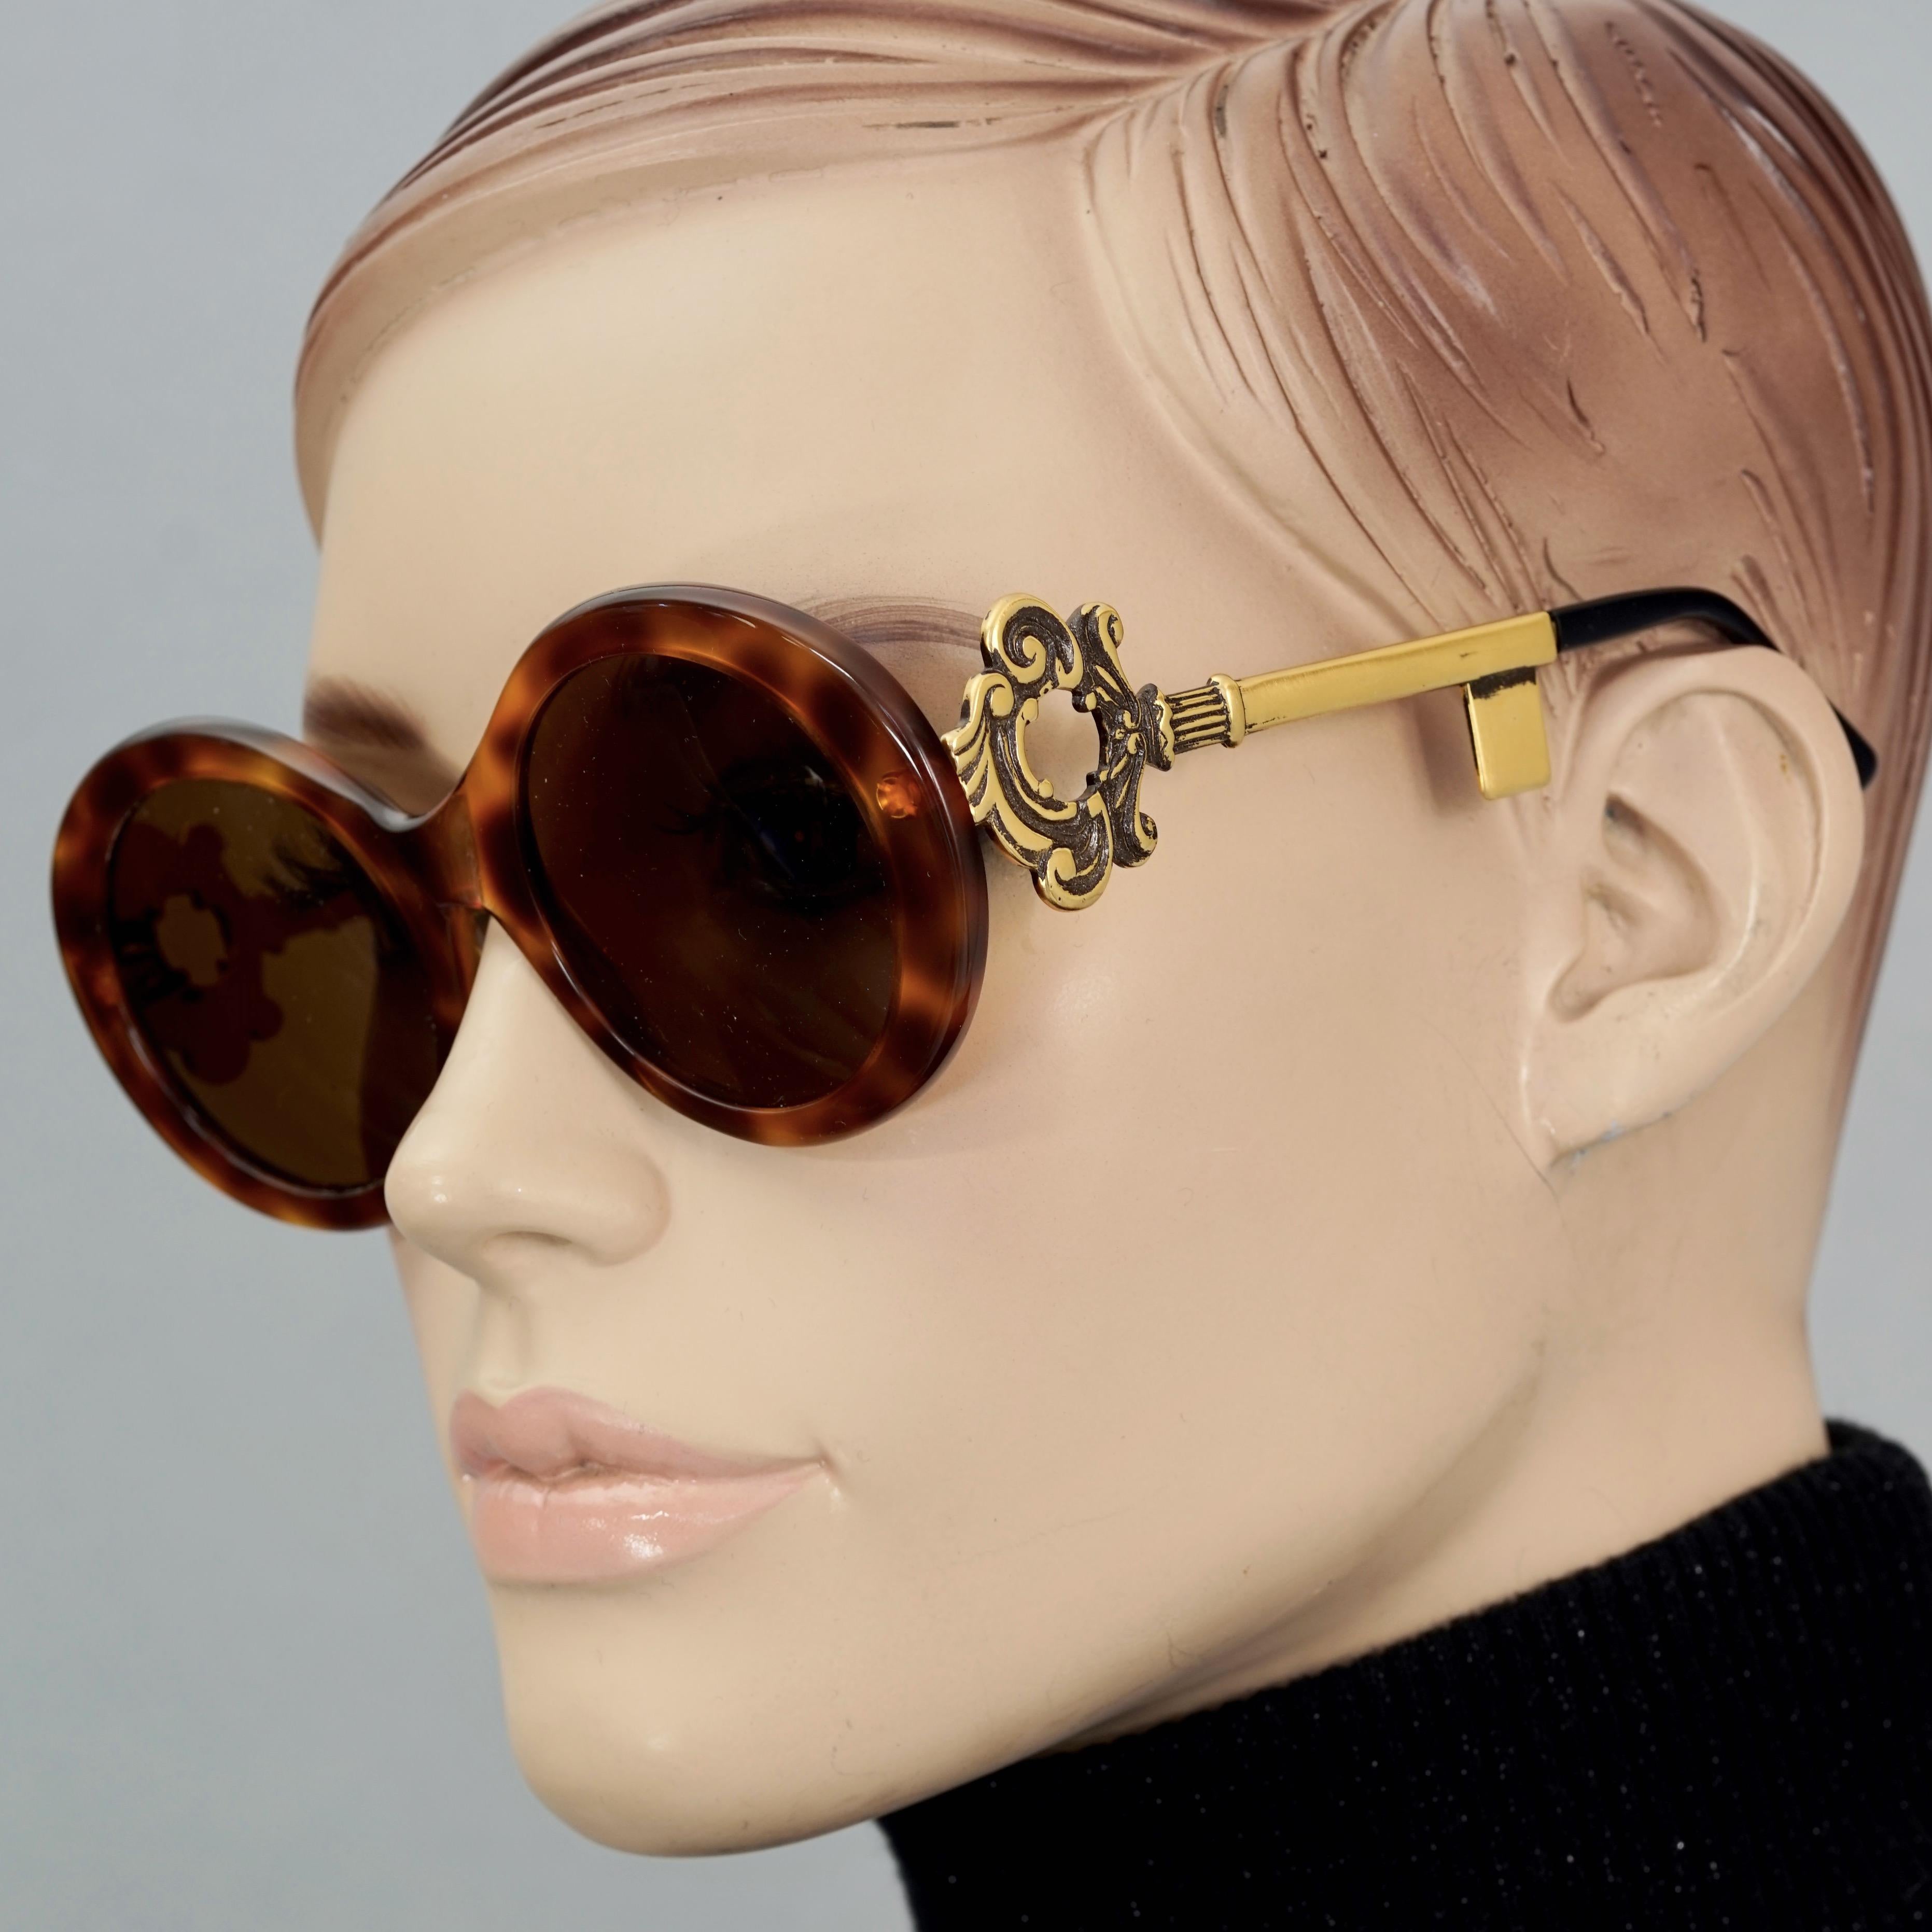 Vintage MOSCHINO Baroque Key Round Tortoiseshell Novelty Sunglasses

Measurements:
Height: 2.16 inches (5.5 cm)
Horizontal Width: 5.39 inches (13.7 cm)
Arms: 5.11 inches (13 cm)

Features:
- 100% Authentic MOSCHINO. 
- Round tortoiseshell sunglasses